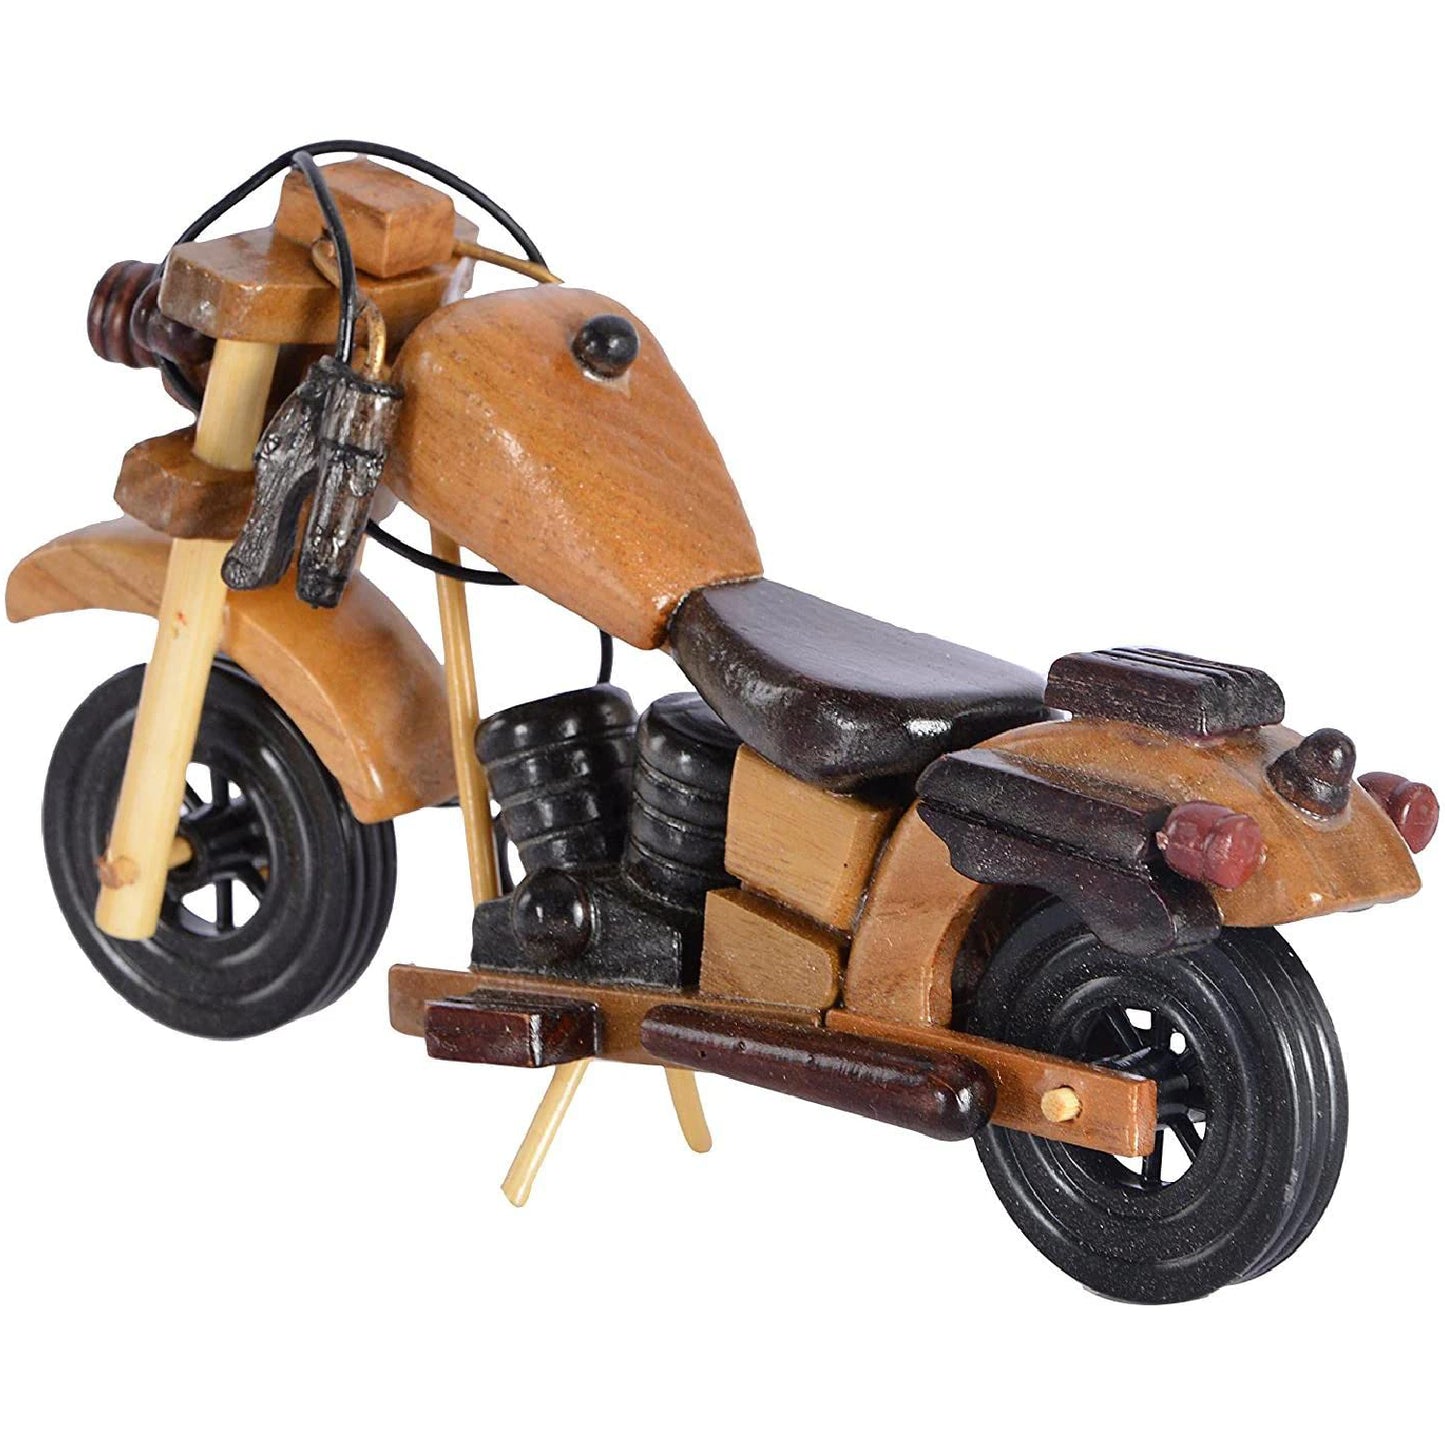 Wooden Balance Bike, Wooden Bike With Side Stand Multicolor, Medium Size